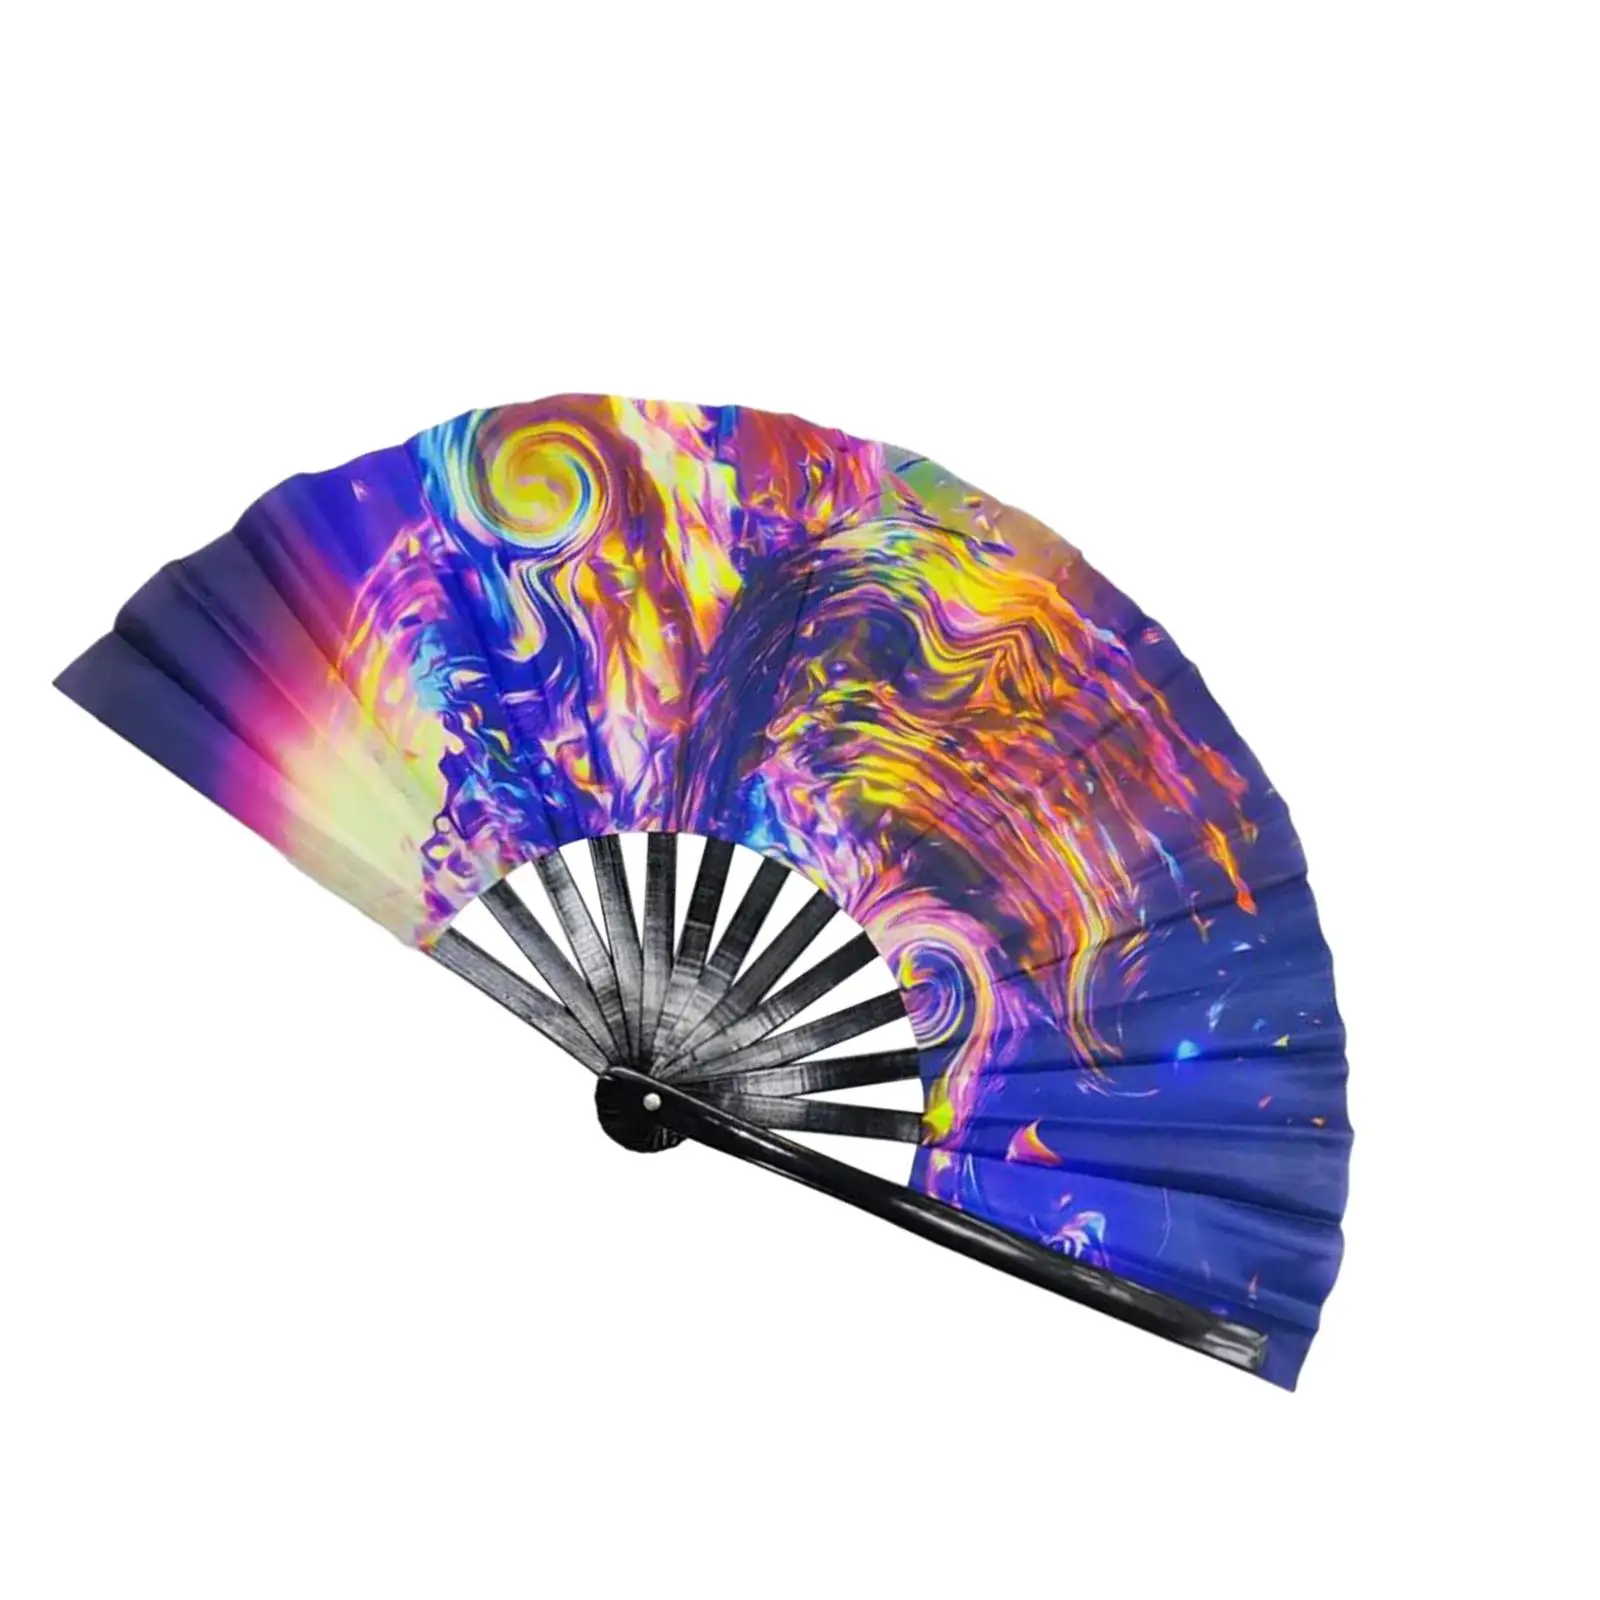 Rave Folding Hand Fan Fluorescent Effects Handheld Fan for Bars Stage Show Performance Dancing Props Festivals Party Supplies